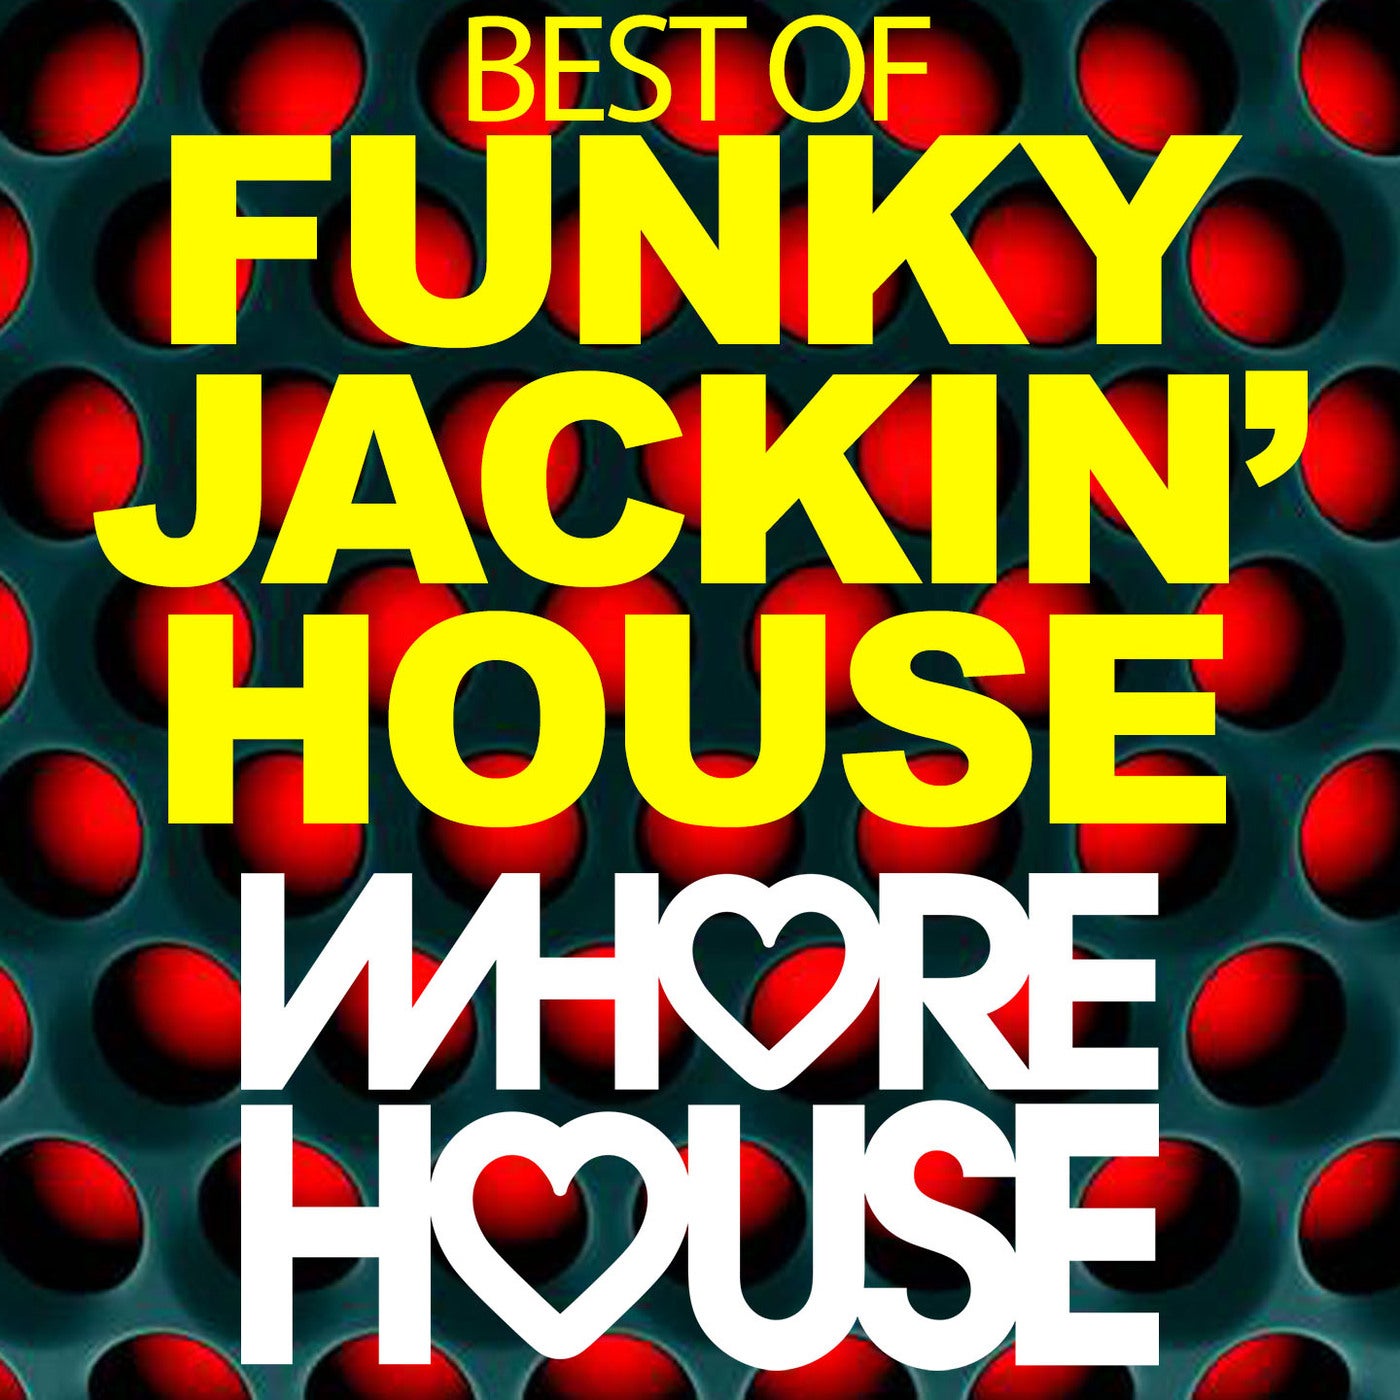 Whore House Best Of Funky Jackin' House